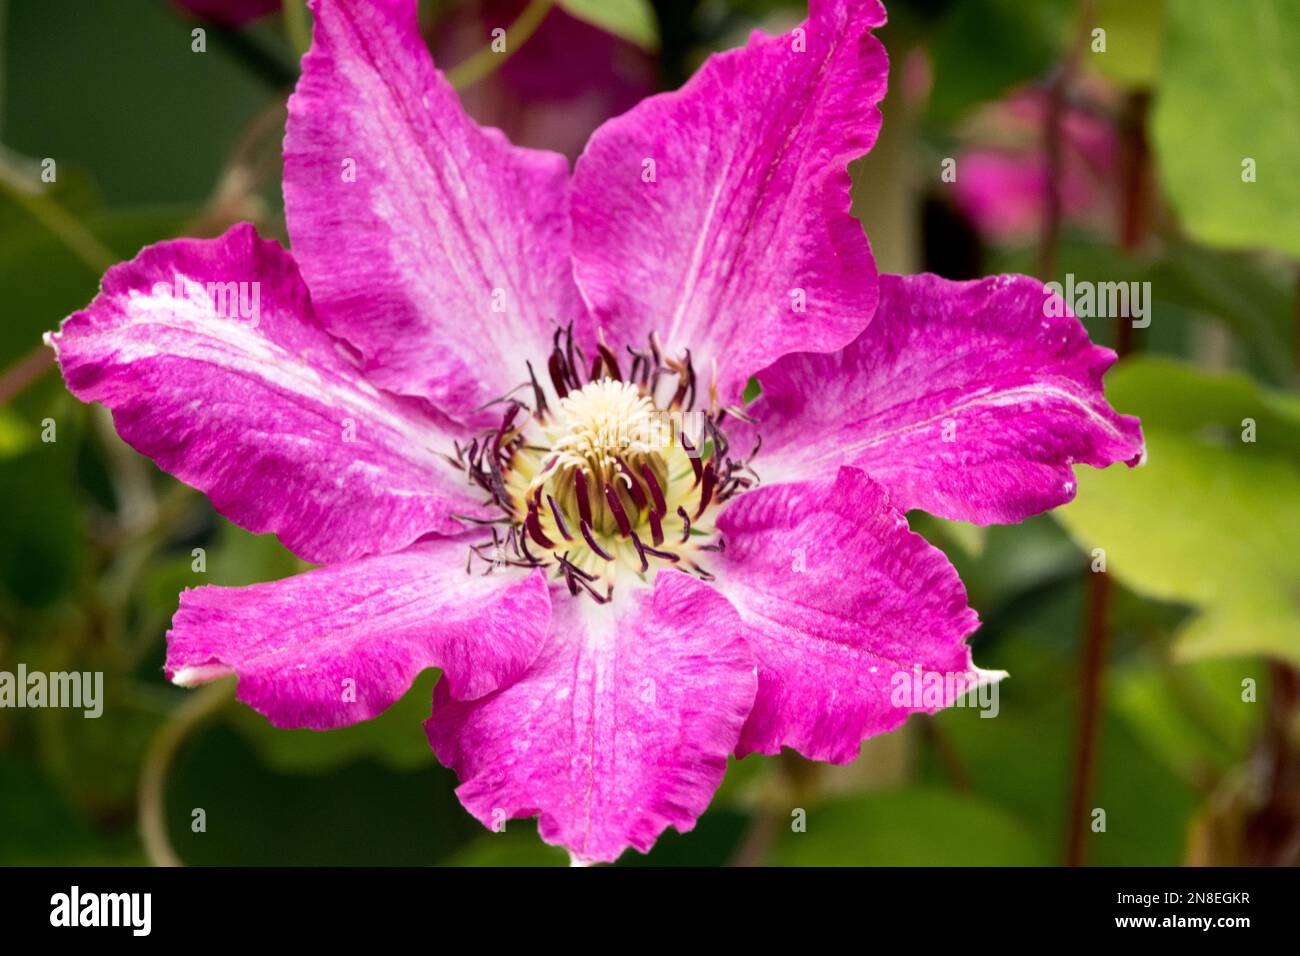 Clematis flower, Pink Clematis 'Viva Polonia', Clematis close-up flower Stock Photo